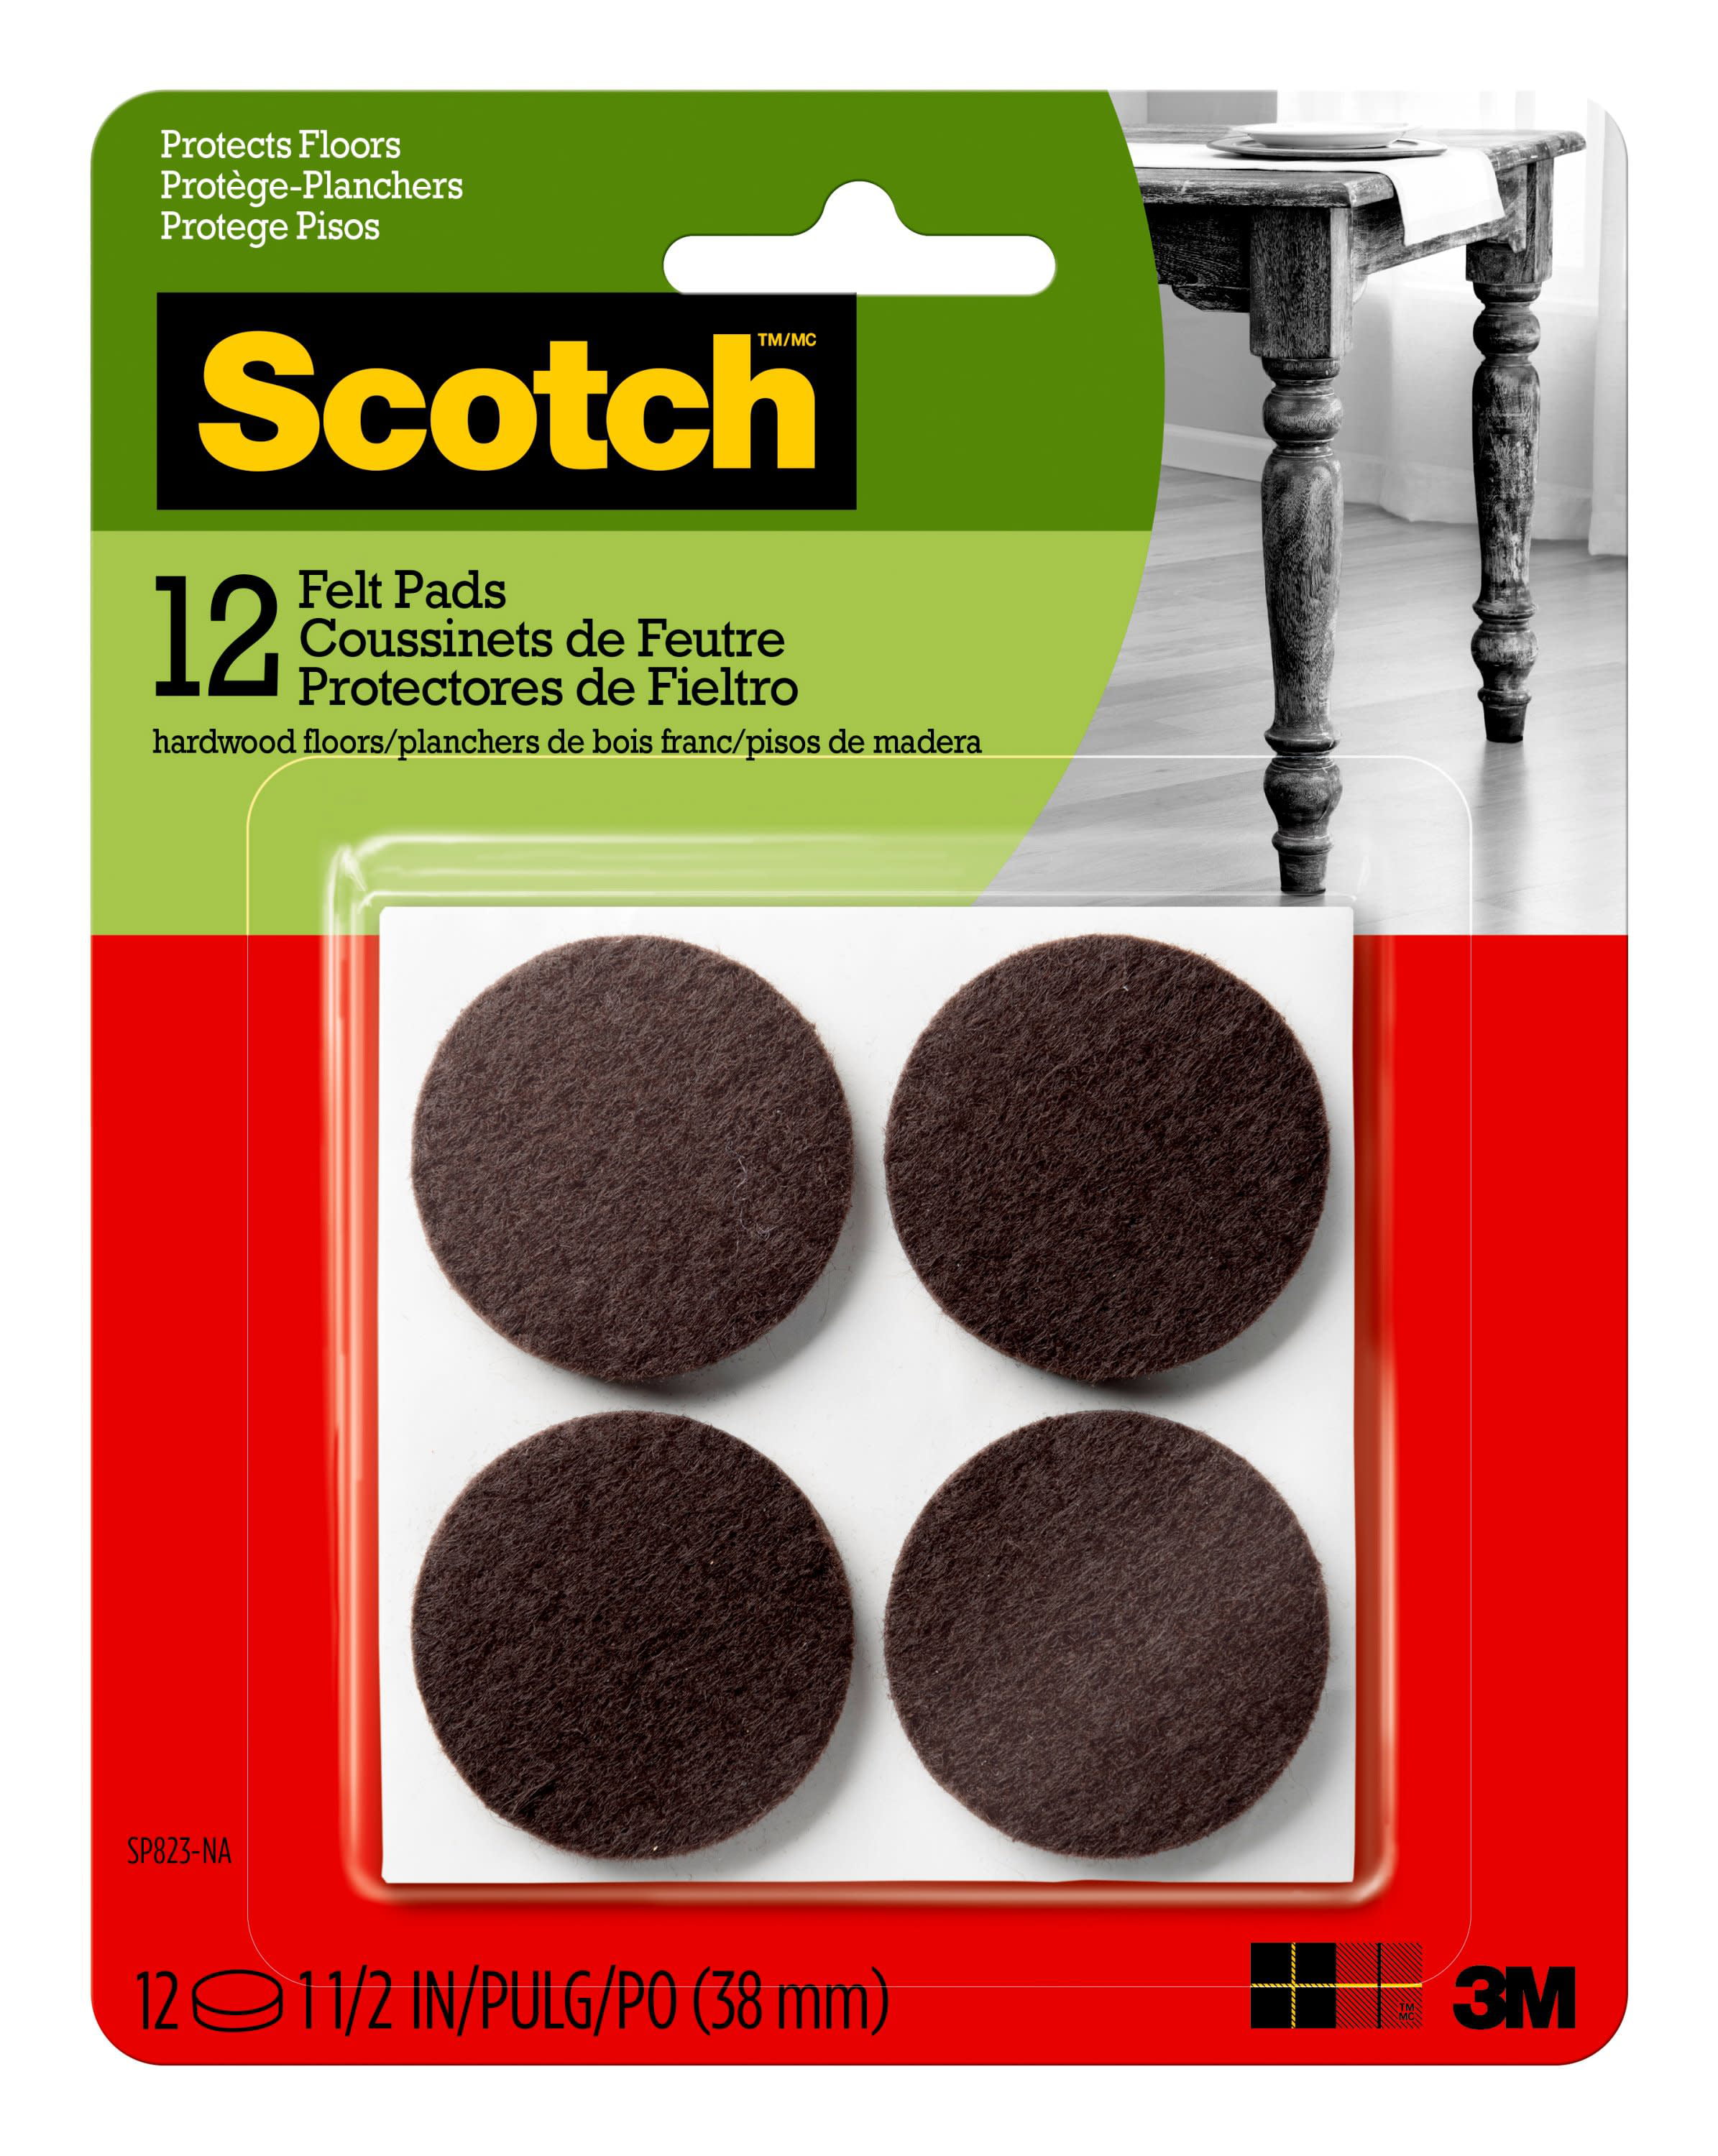 Scotch Gripping Pads Round Brown 1.5-in Diameter 8 Pads/pack of 6 Total 48 for sale online 